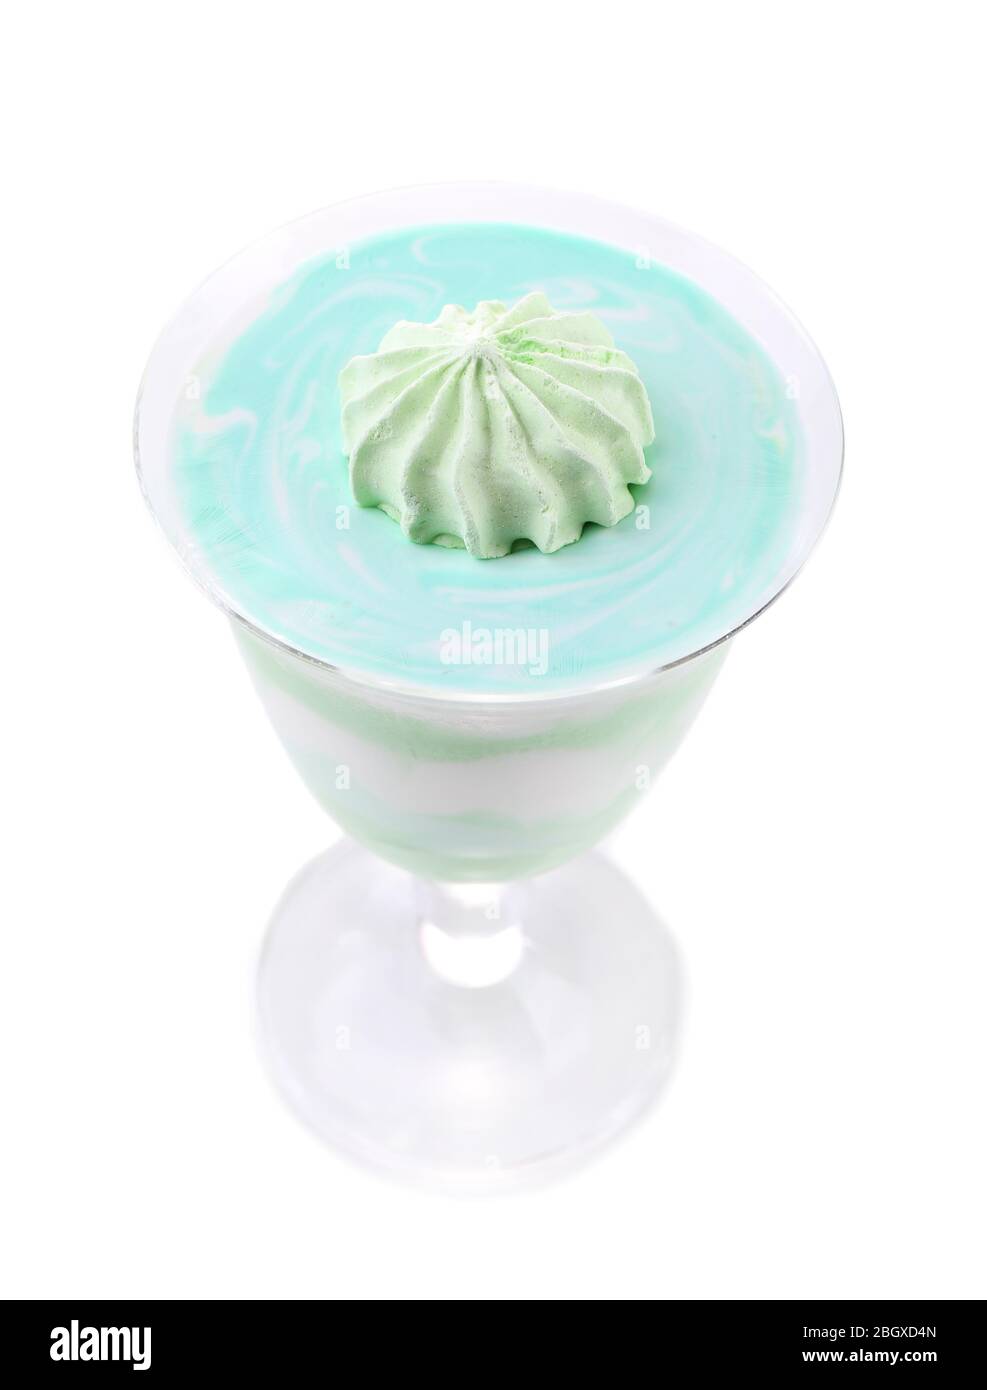 Mint milk dessert in glass bowl isolated on white Stock Photo